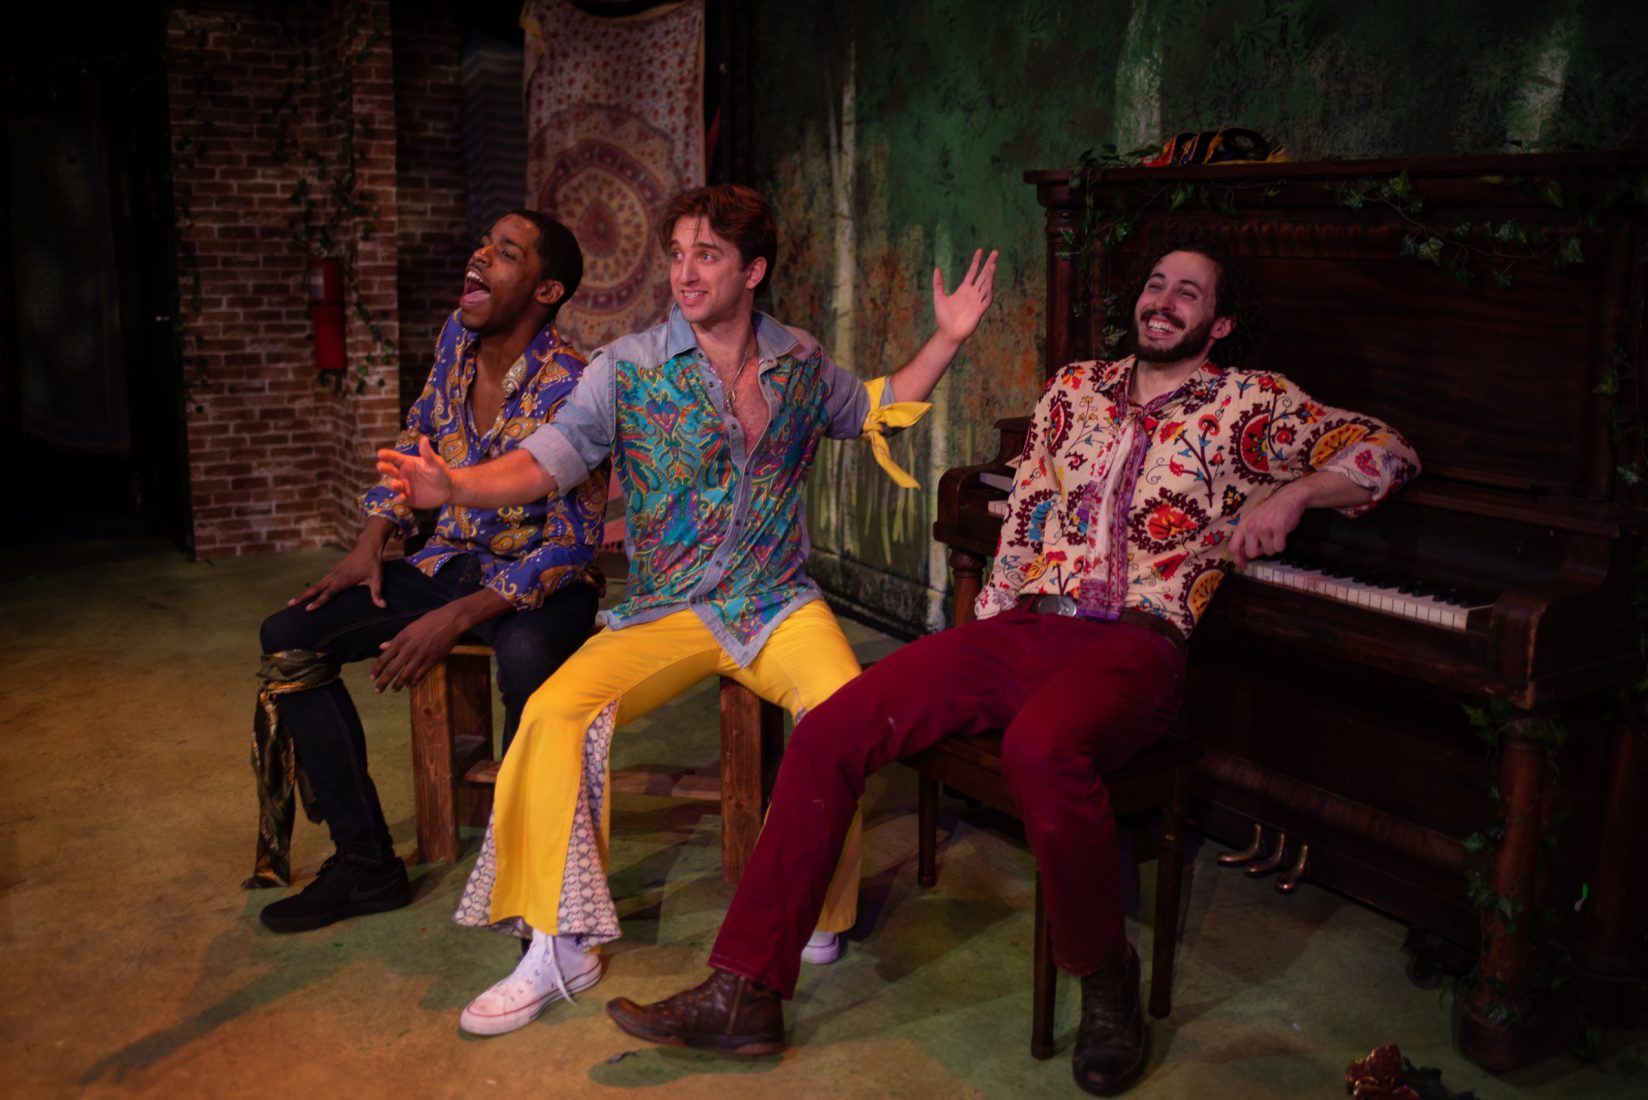 Review: ‘Love’s Labour’s Lost’ Wins Laughs in Hippie Lovefest